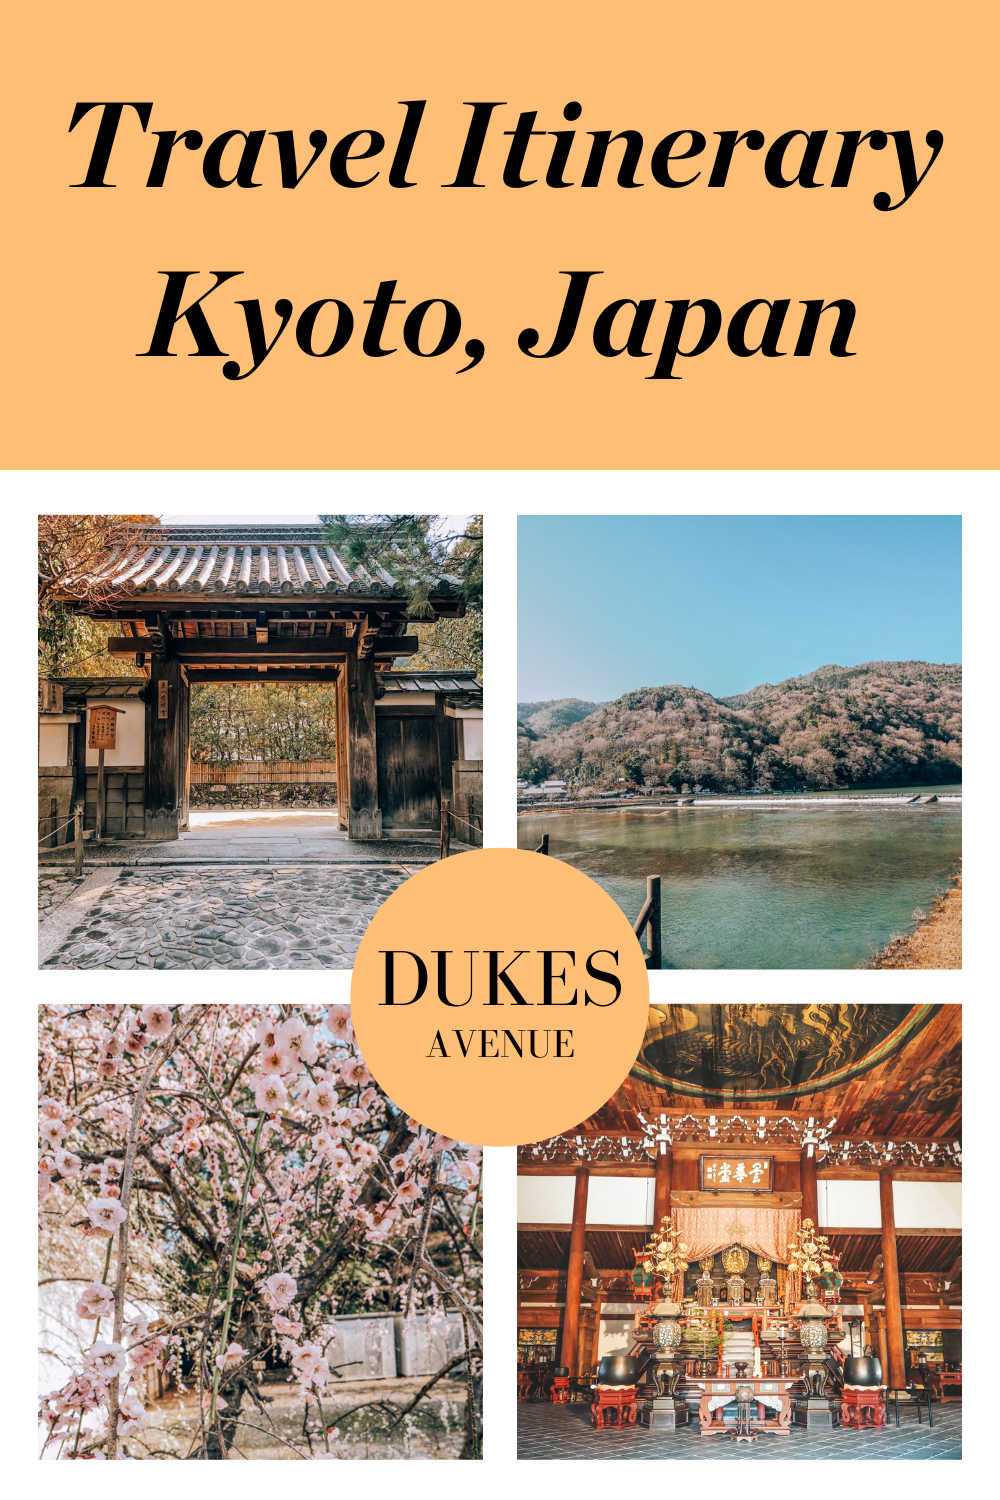 Famous spots in Kyoto with text overlay "Travel Itinerary Kyoto, Japan"